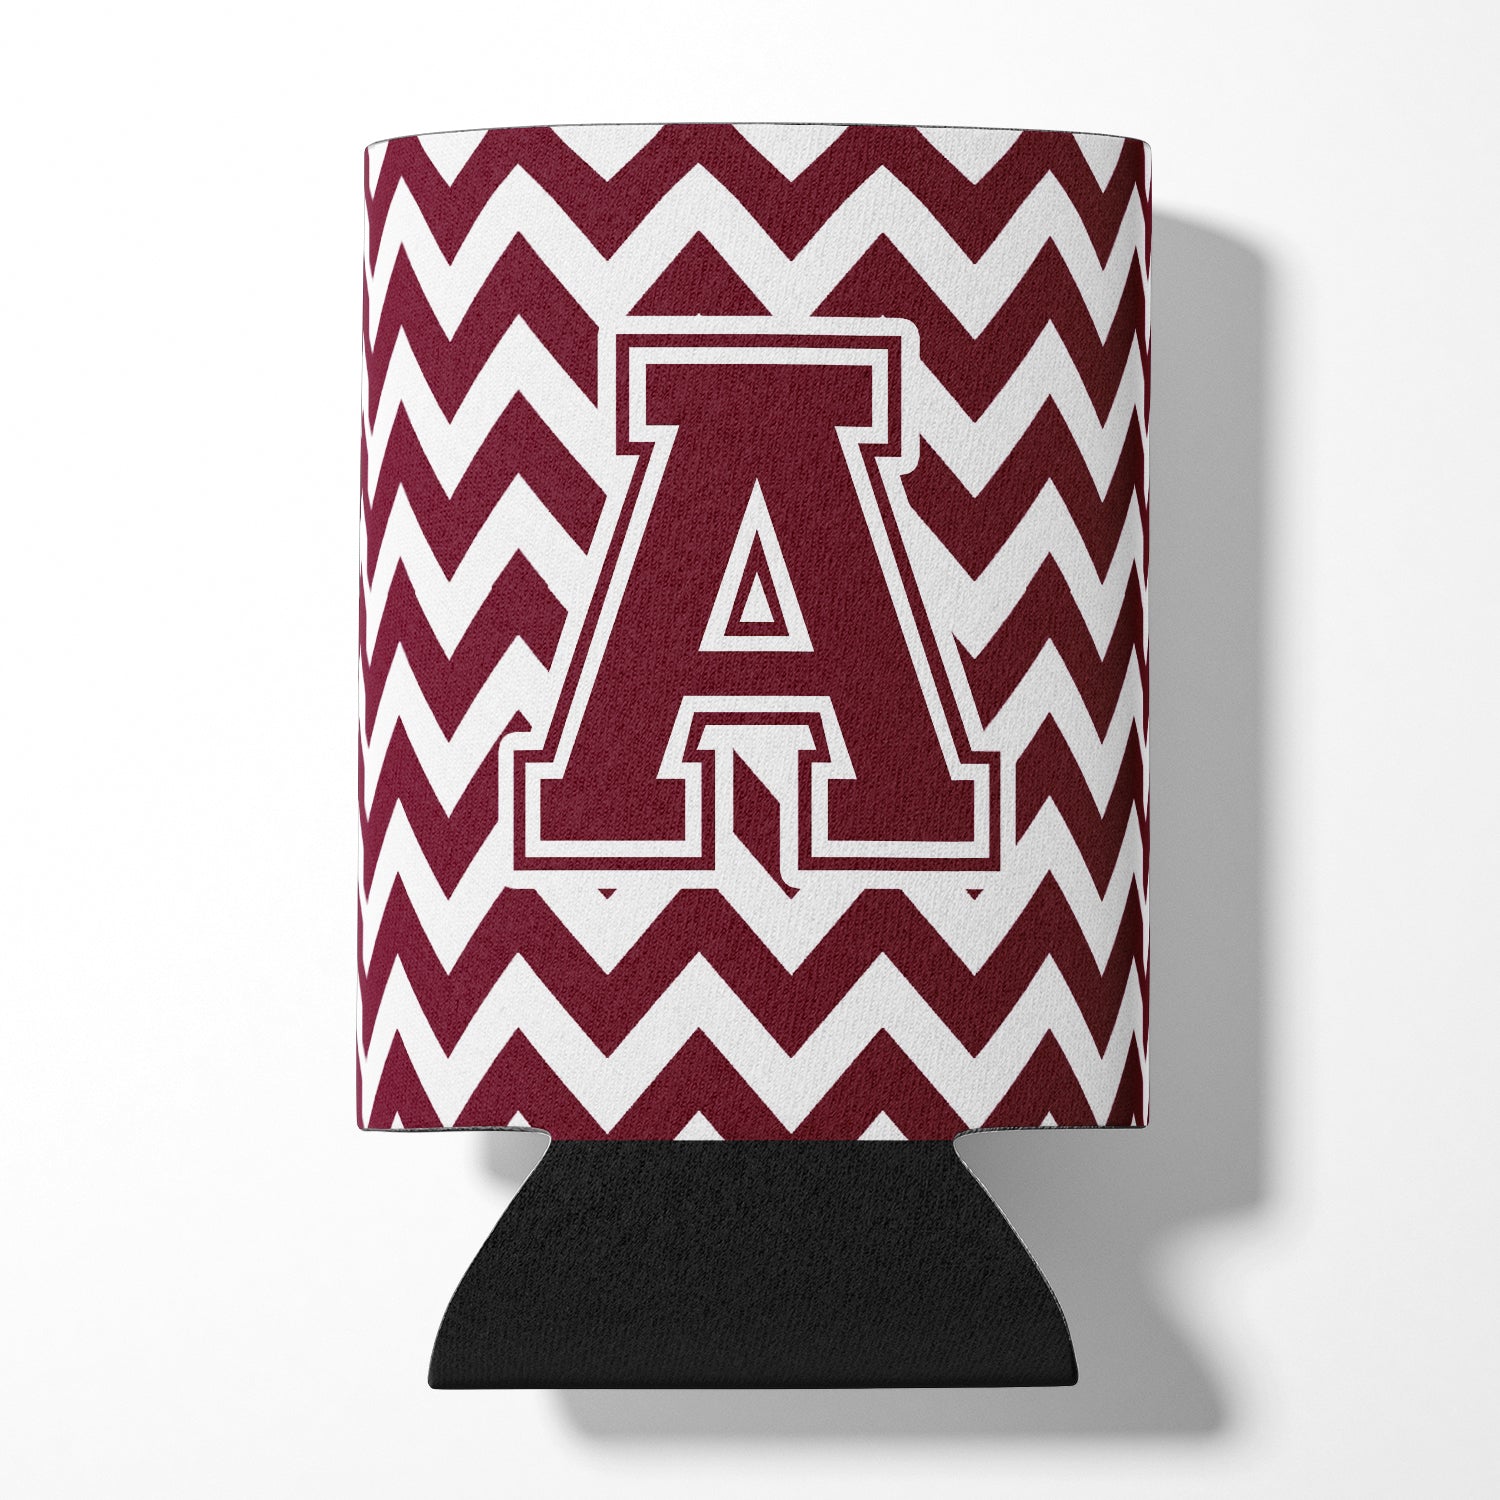 Letter A Chevron Maroon and White  Can or Bottle Hugger CJ1051-ACC.